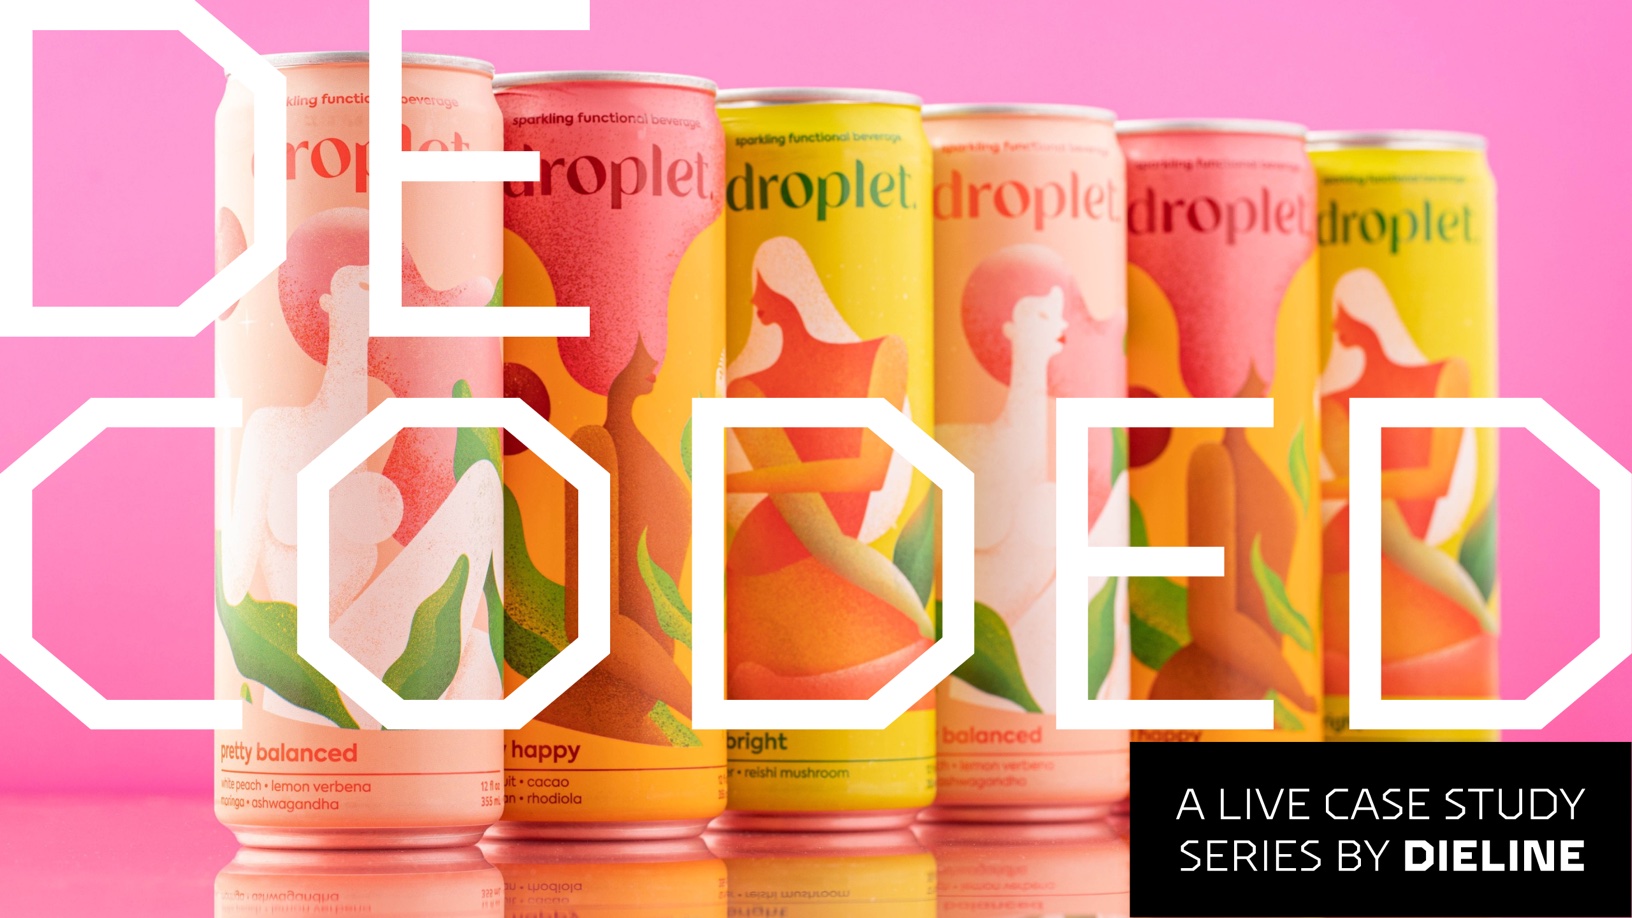 On-Demand: Celeste Perez and Lou Wright From Well Fed Decode The Design Behind Droplet